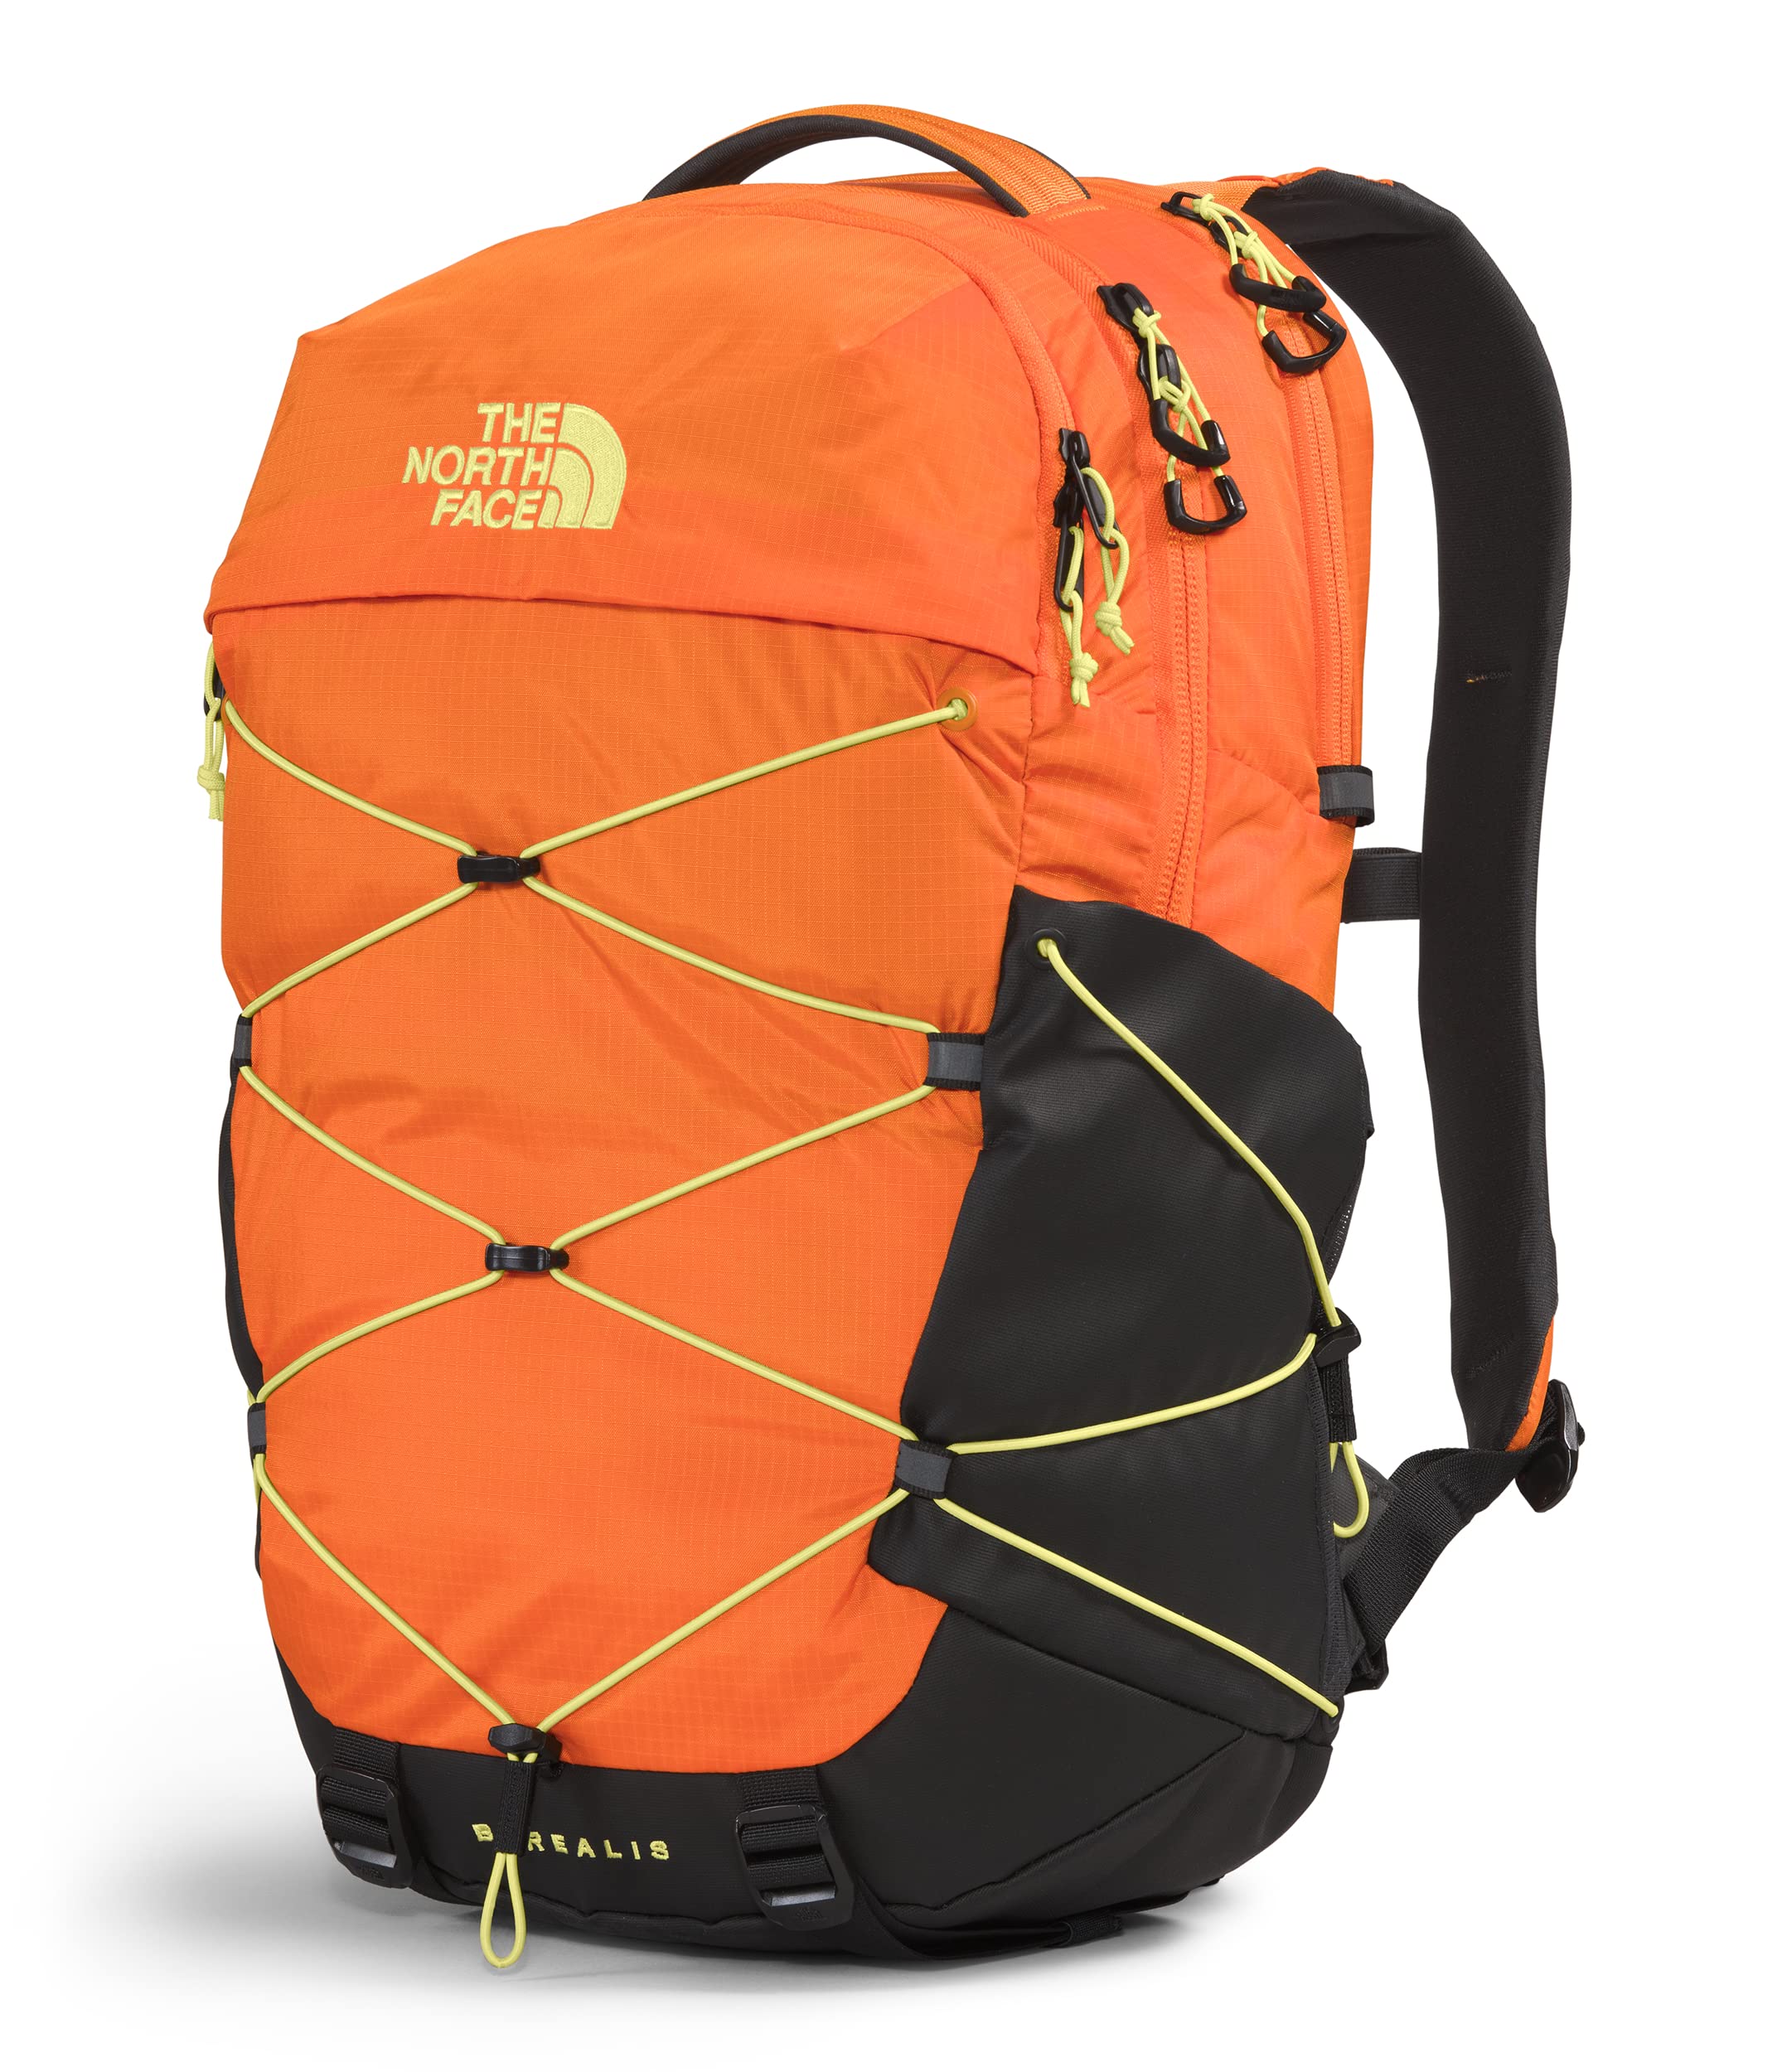 THE NORTH FACE Borealis Laptop Backpack